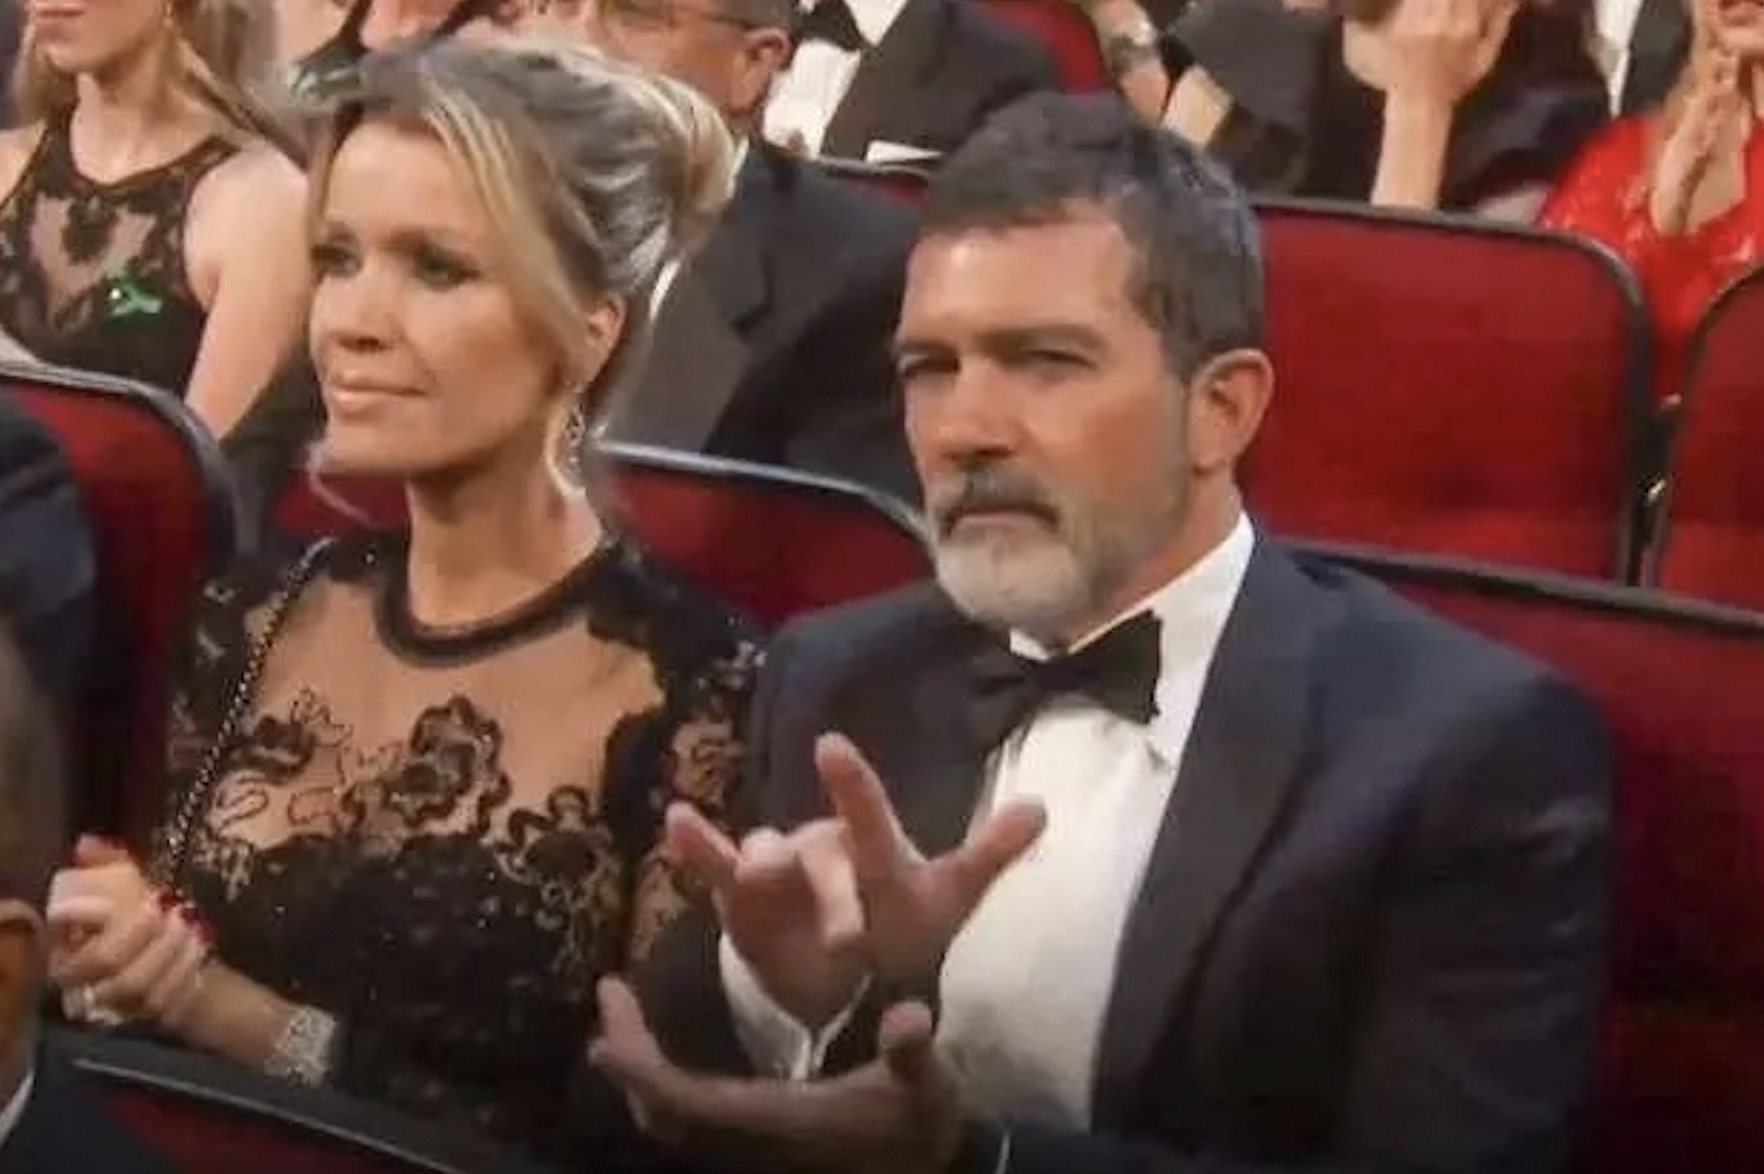 Antonio Banderas had viewers baffled with his weird clapping